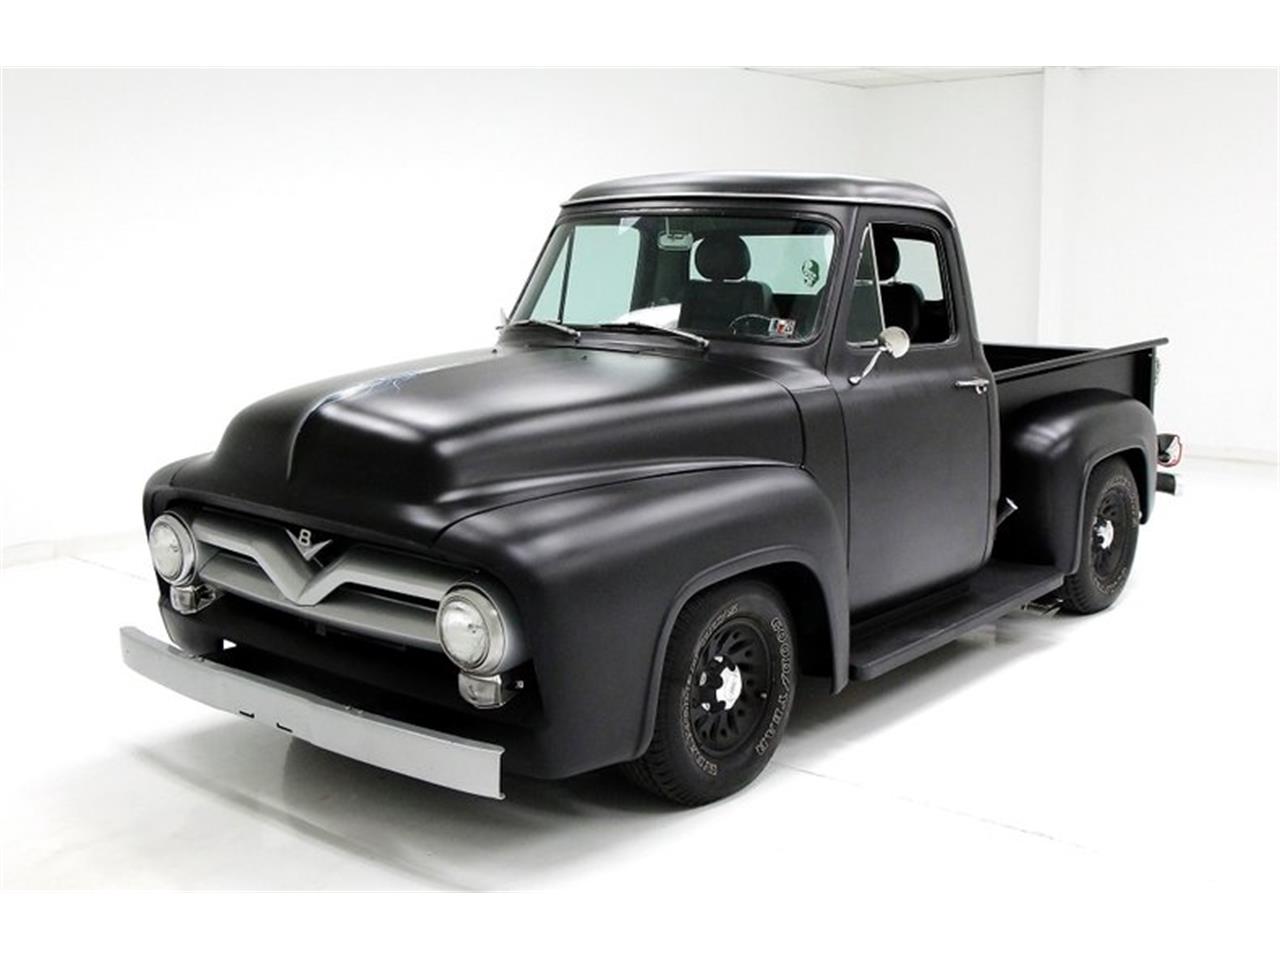 1955 ford f100 for sale classiccars com cc 1373616 1955 ford f100 for sale classiccars